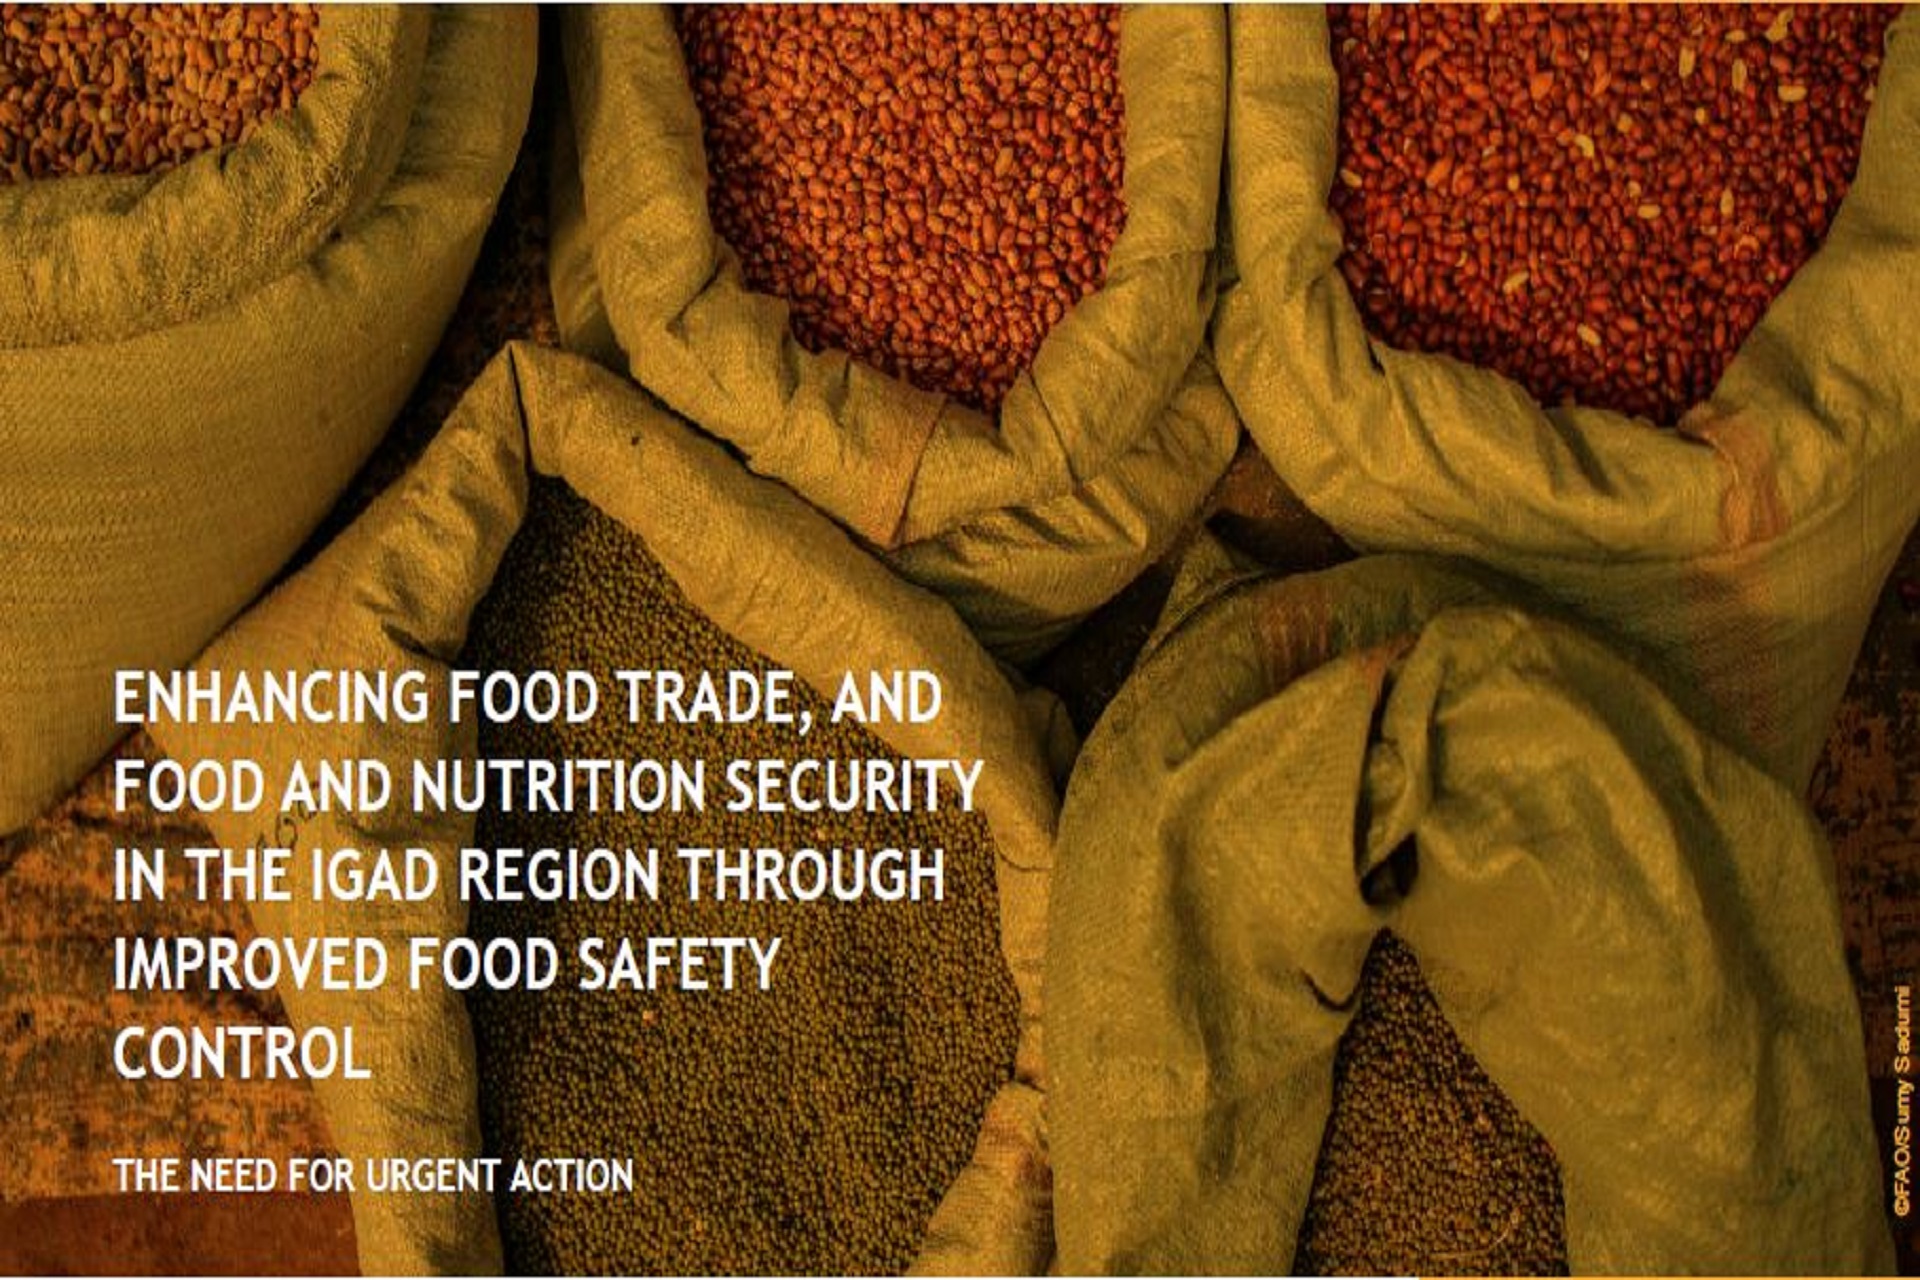 Enhancing Food Trade, and Food and Nutrition Security in the IGAD Region through Improved Food Safety Control the Need for Urgent Action